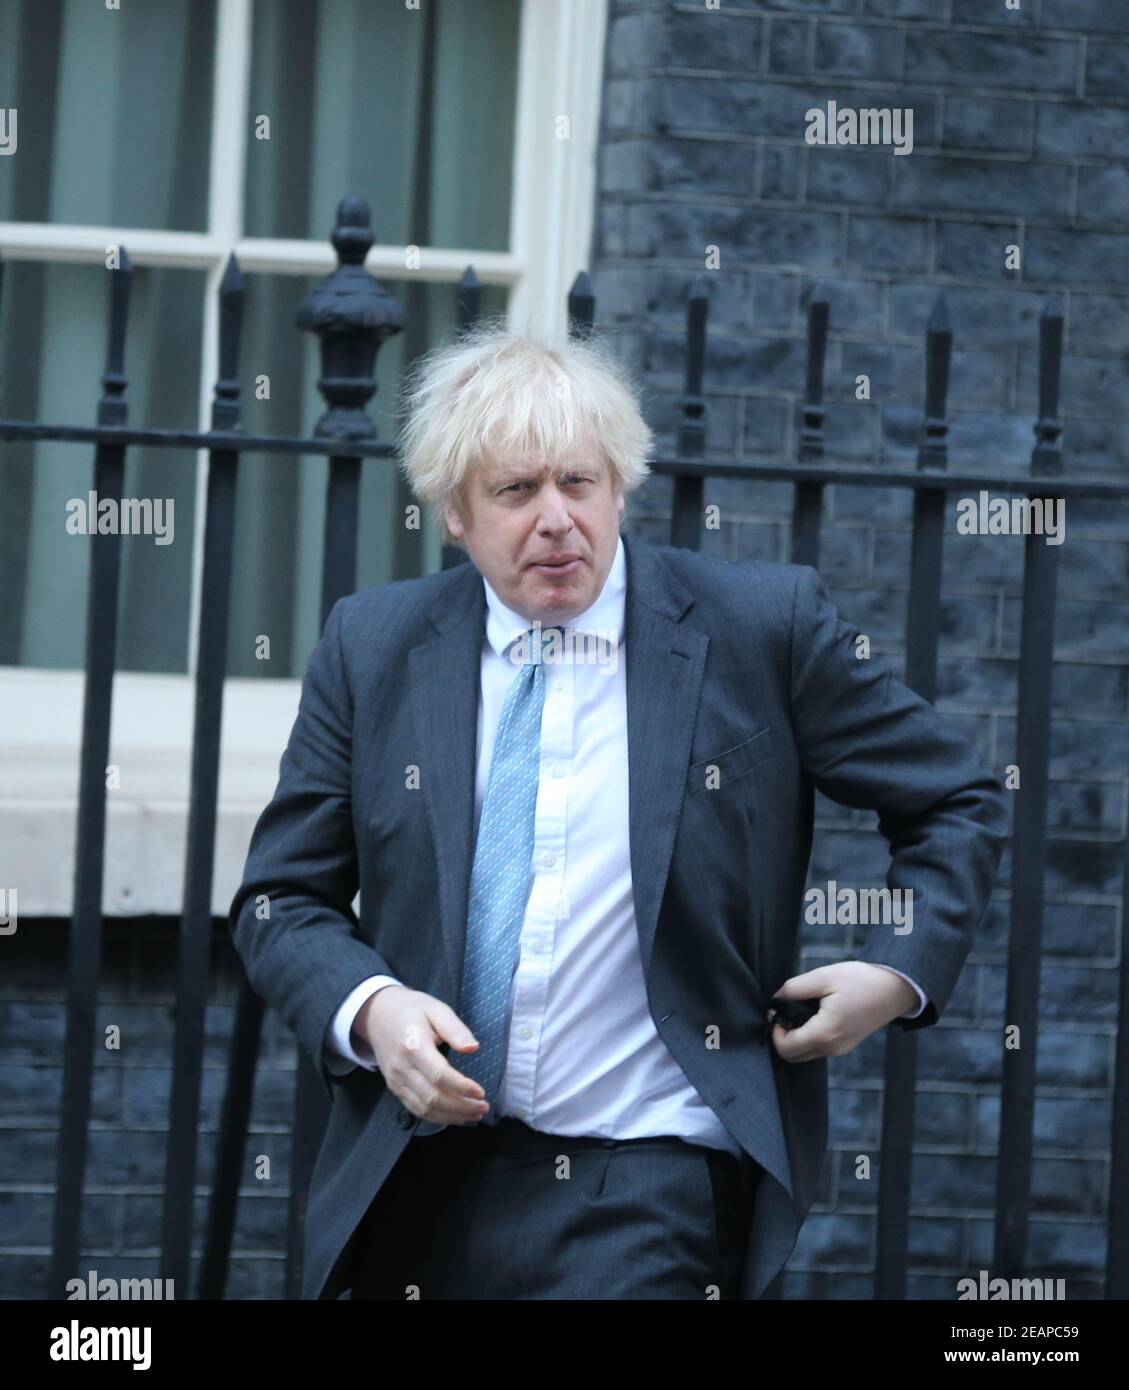 London, England, UK. 10th Feb, 2021. UK Prime Minister BORIS JOHNSON returns 10 Downing Street after the weekly Prime Minister's Questions session in the House of Commons. Credit: Tayfun Salci/ZUMA Wire/Alamy Live News Stock Photo